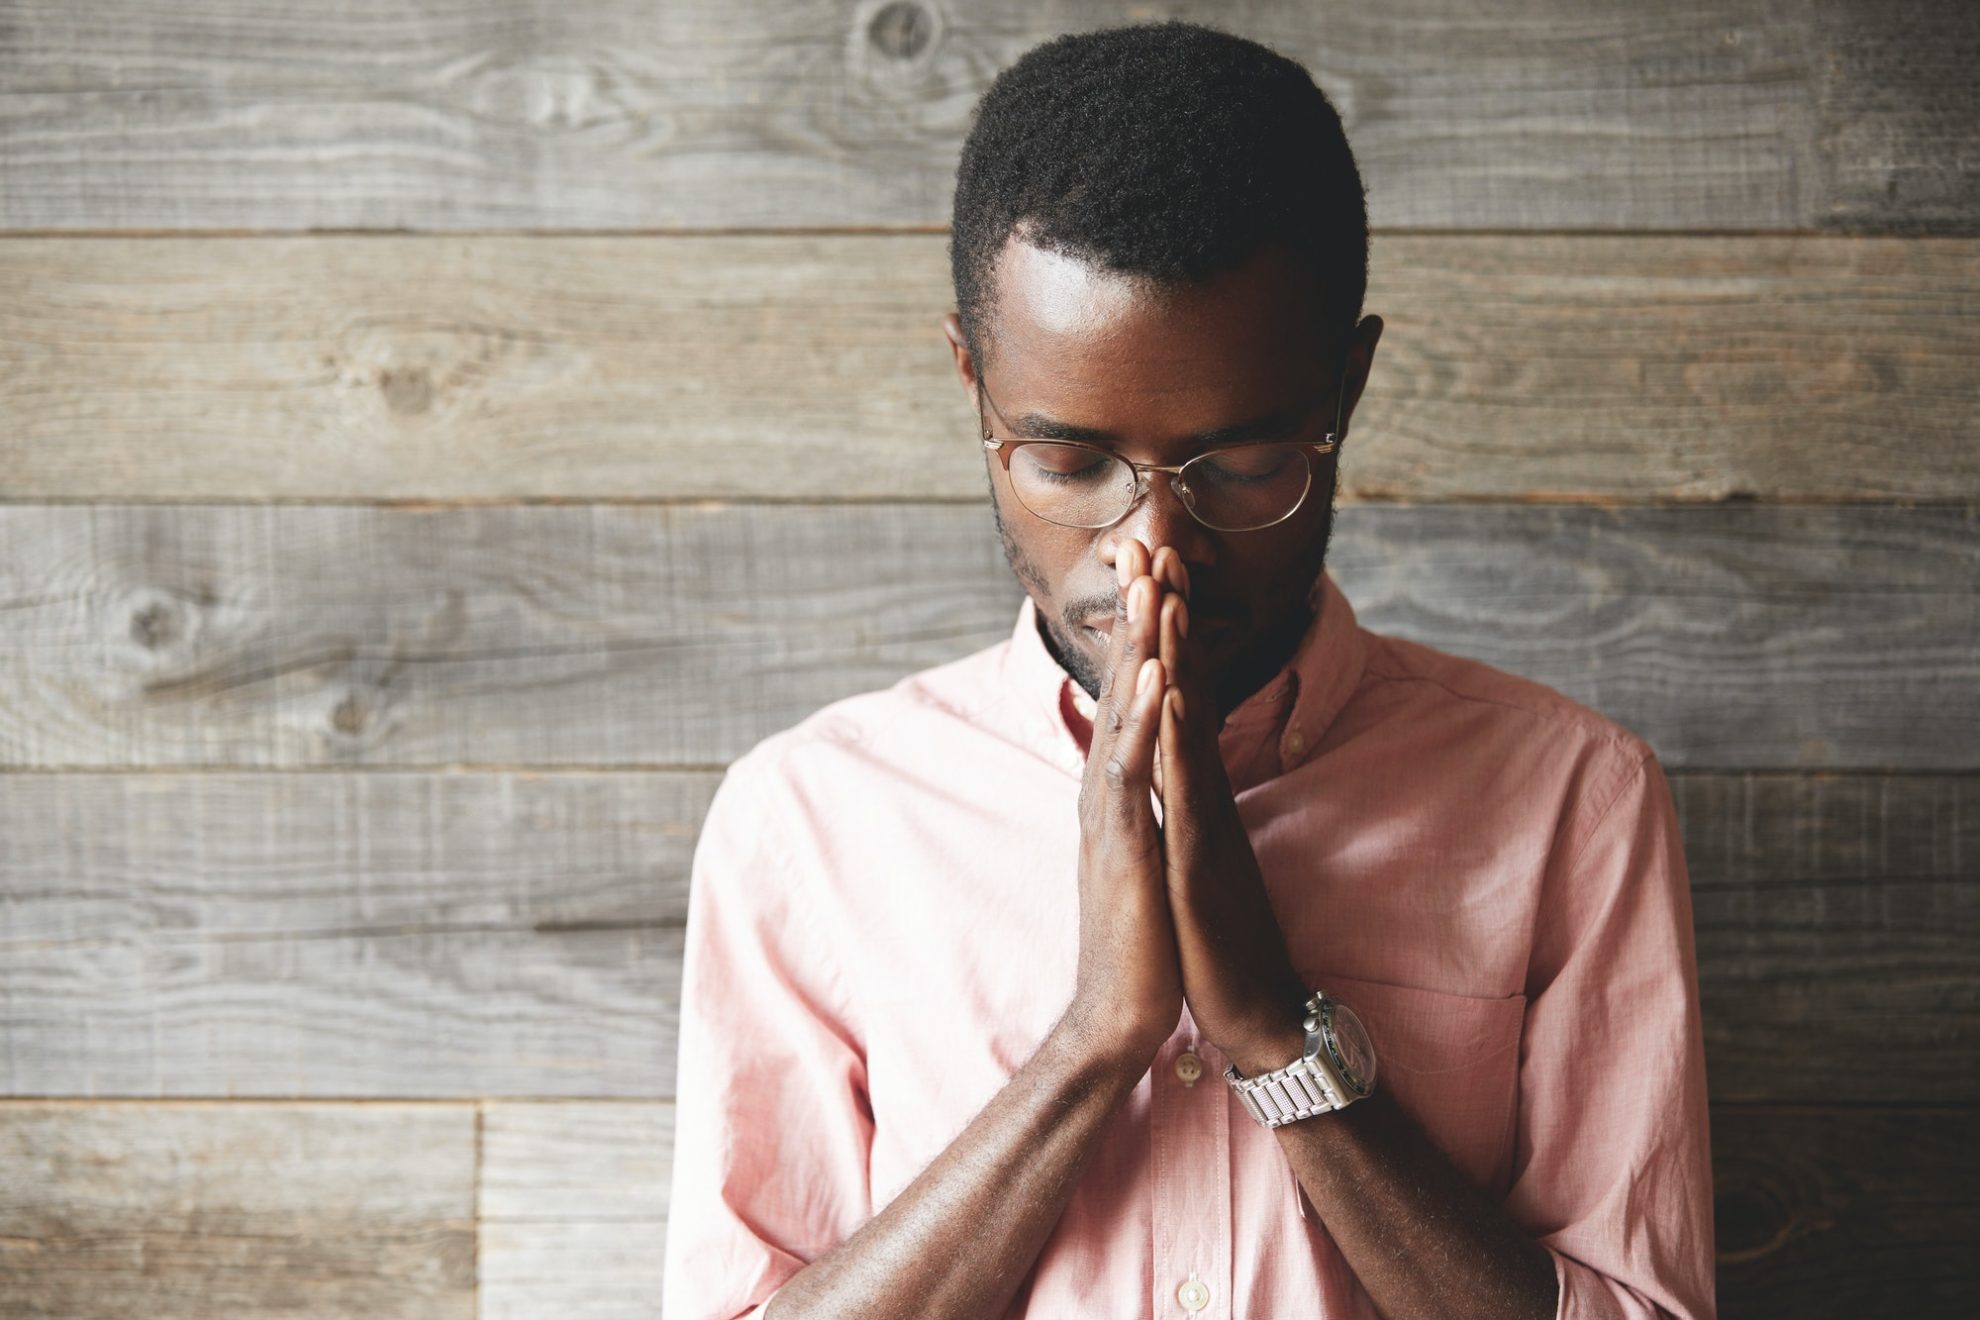 young-meditating-and-praying-african-american-man-wearing-pink-shirt-and-glasses-holding-hands-in-p-1980x1320